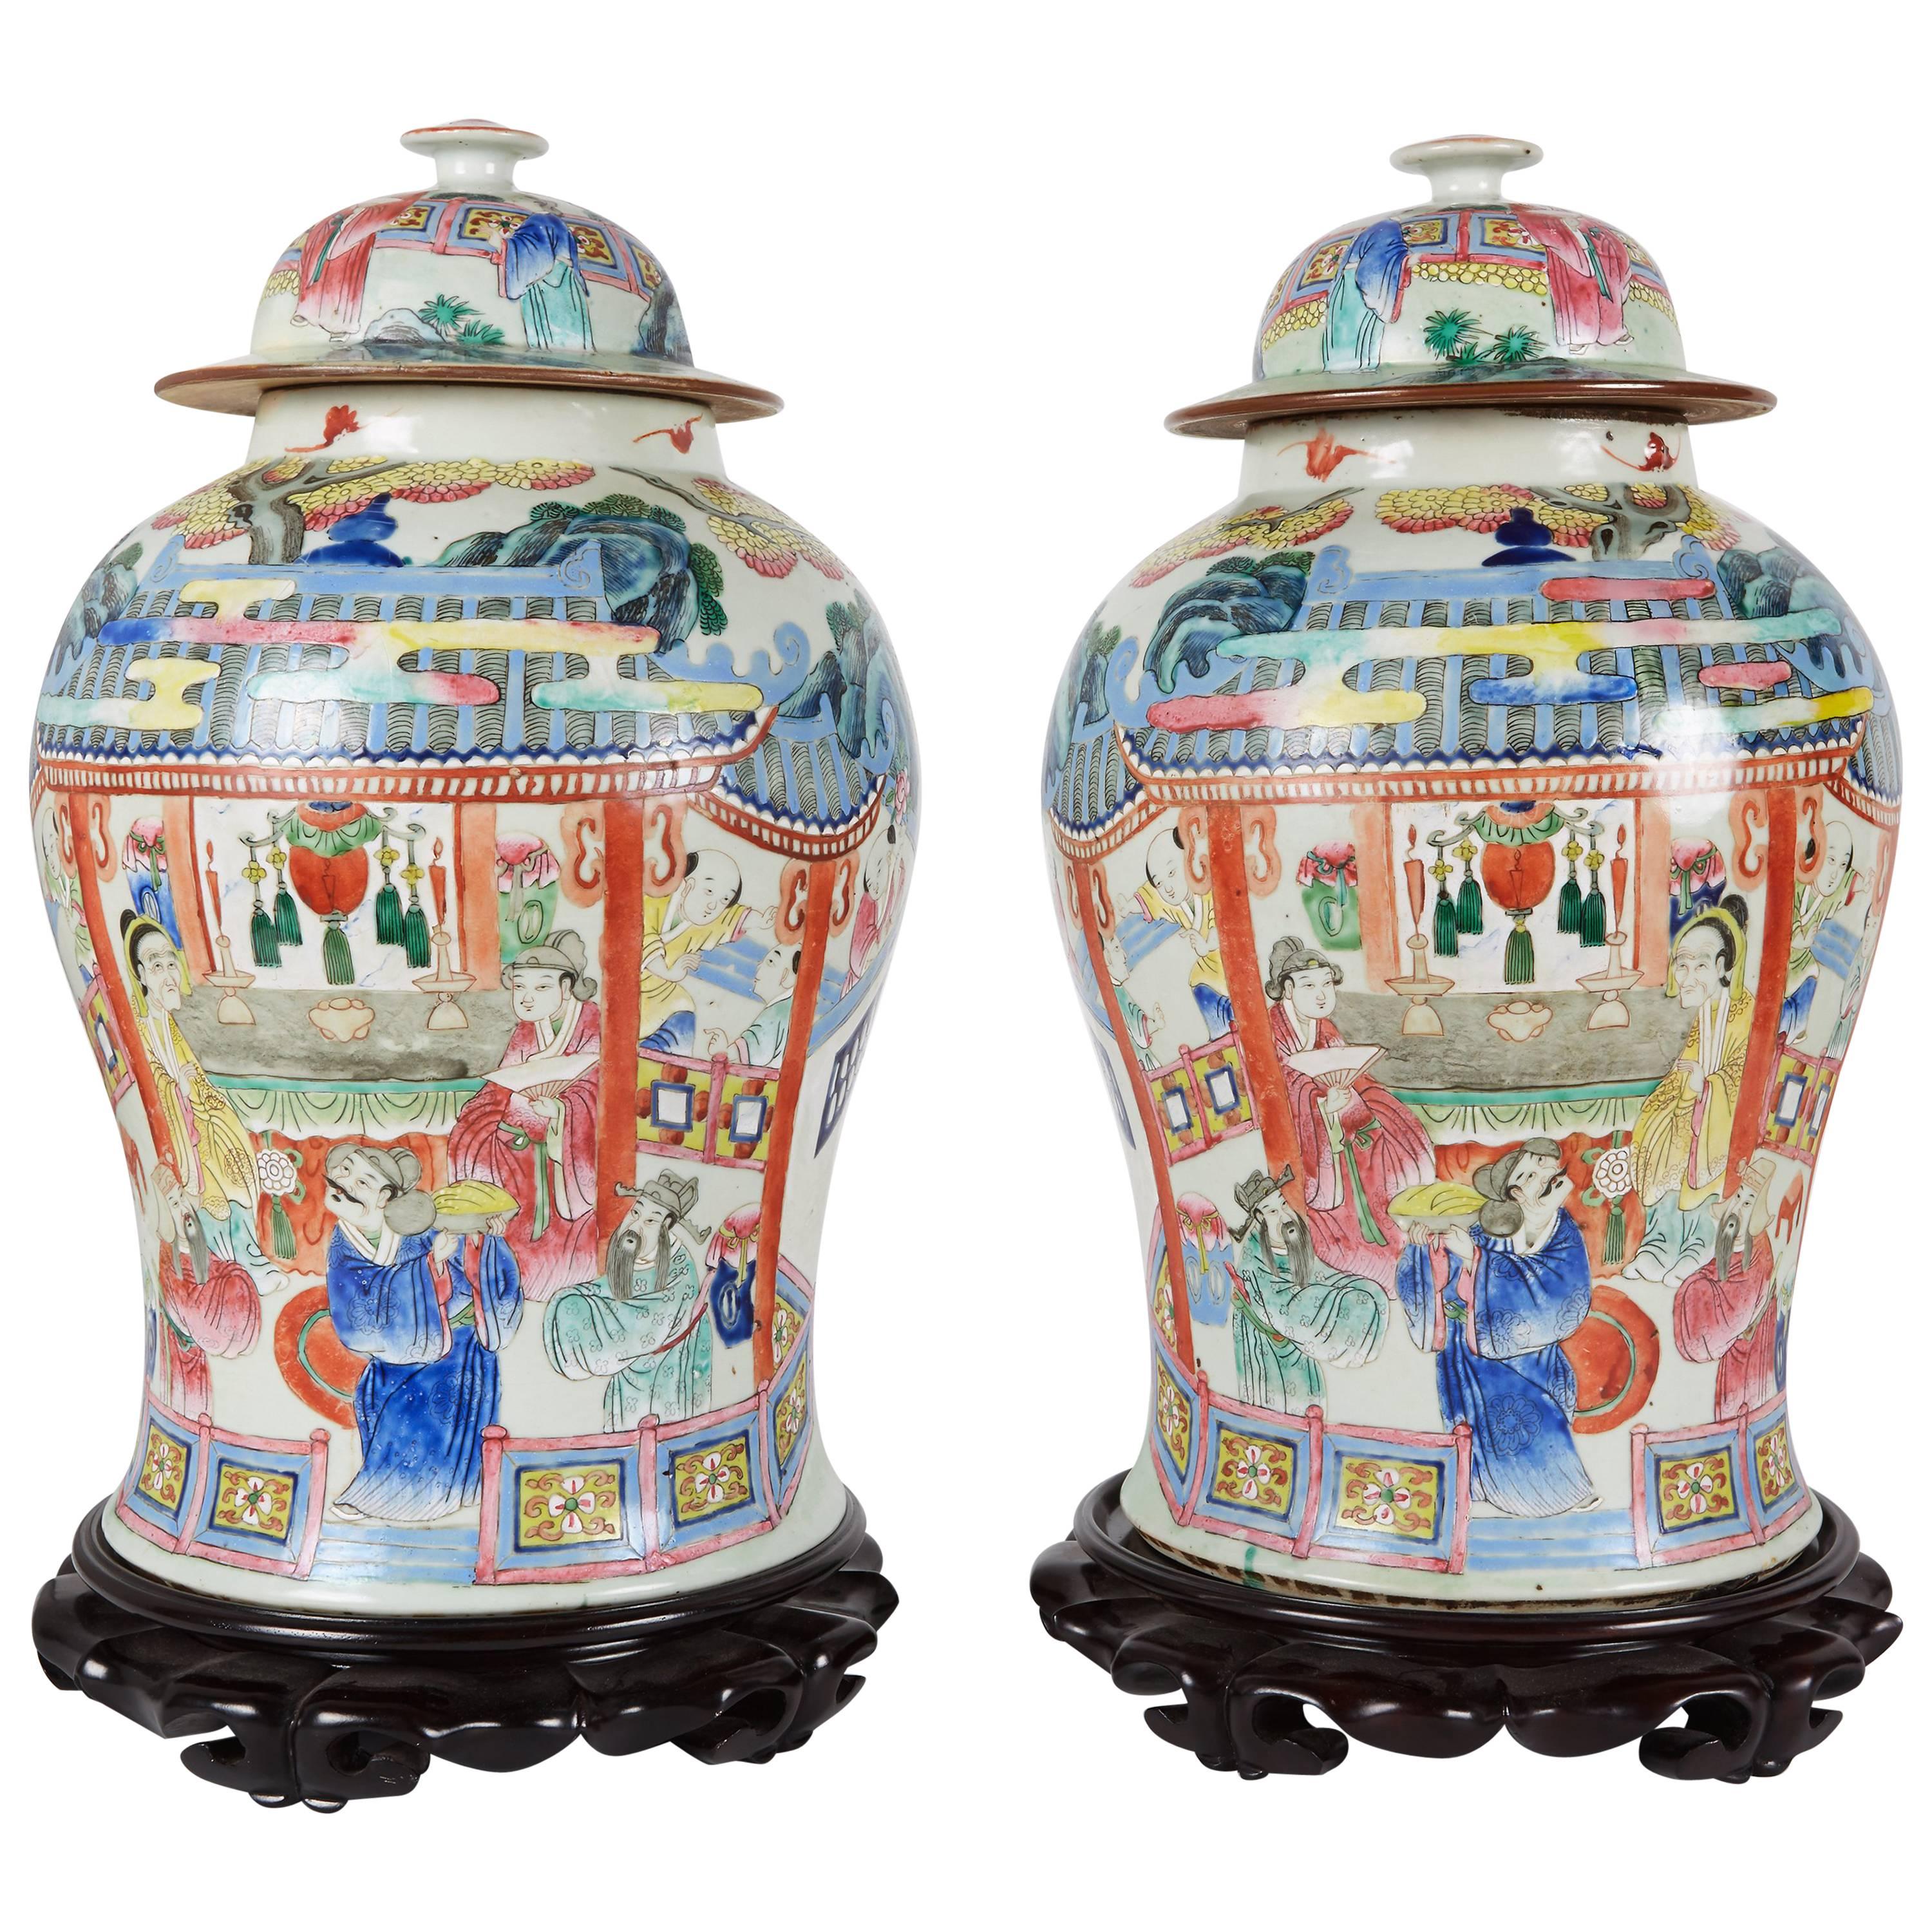 Pair of Large Lidded Chinese Ginger Jars